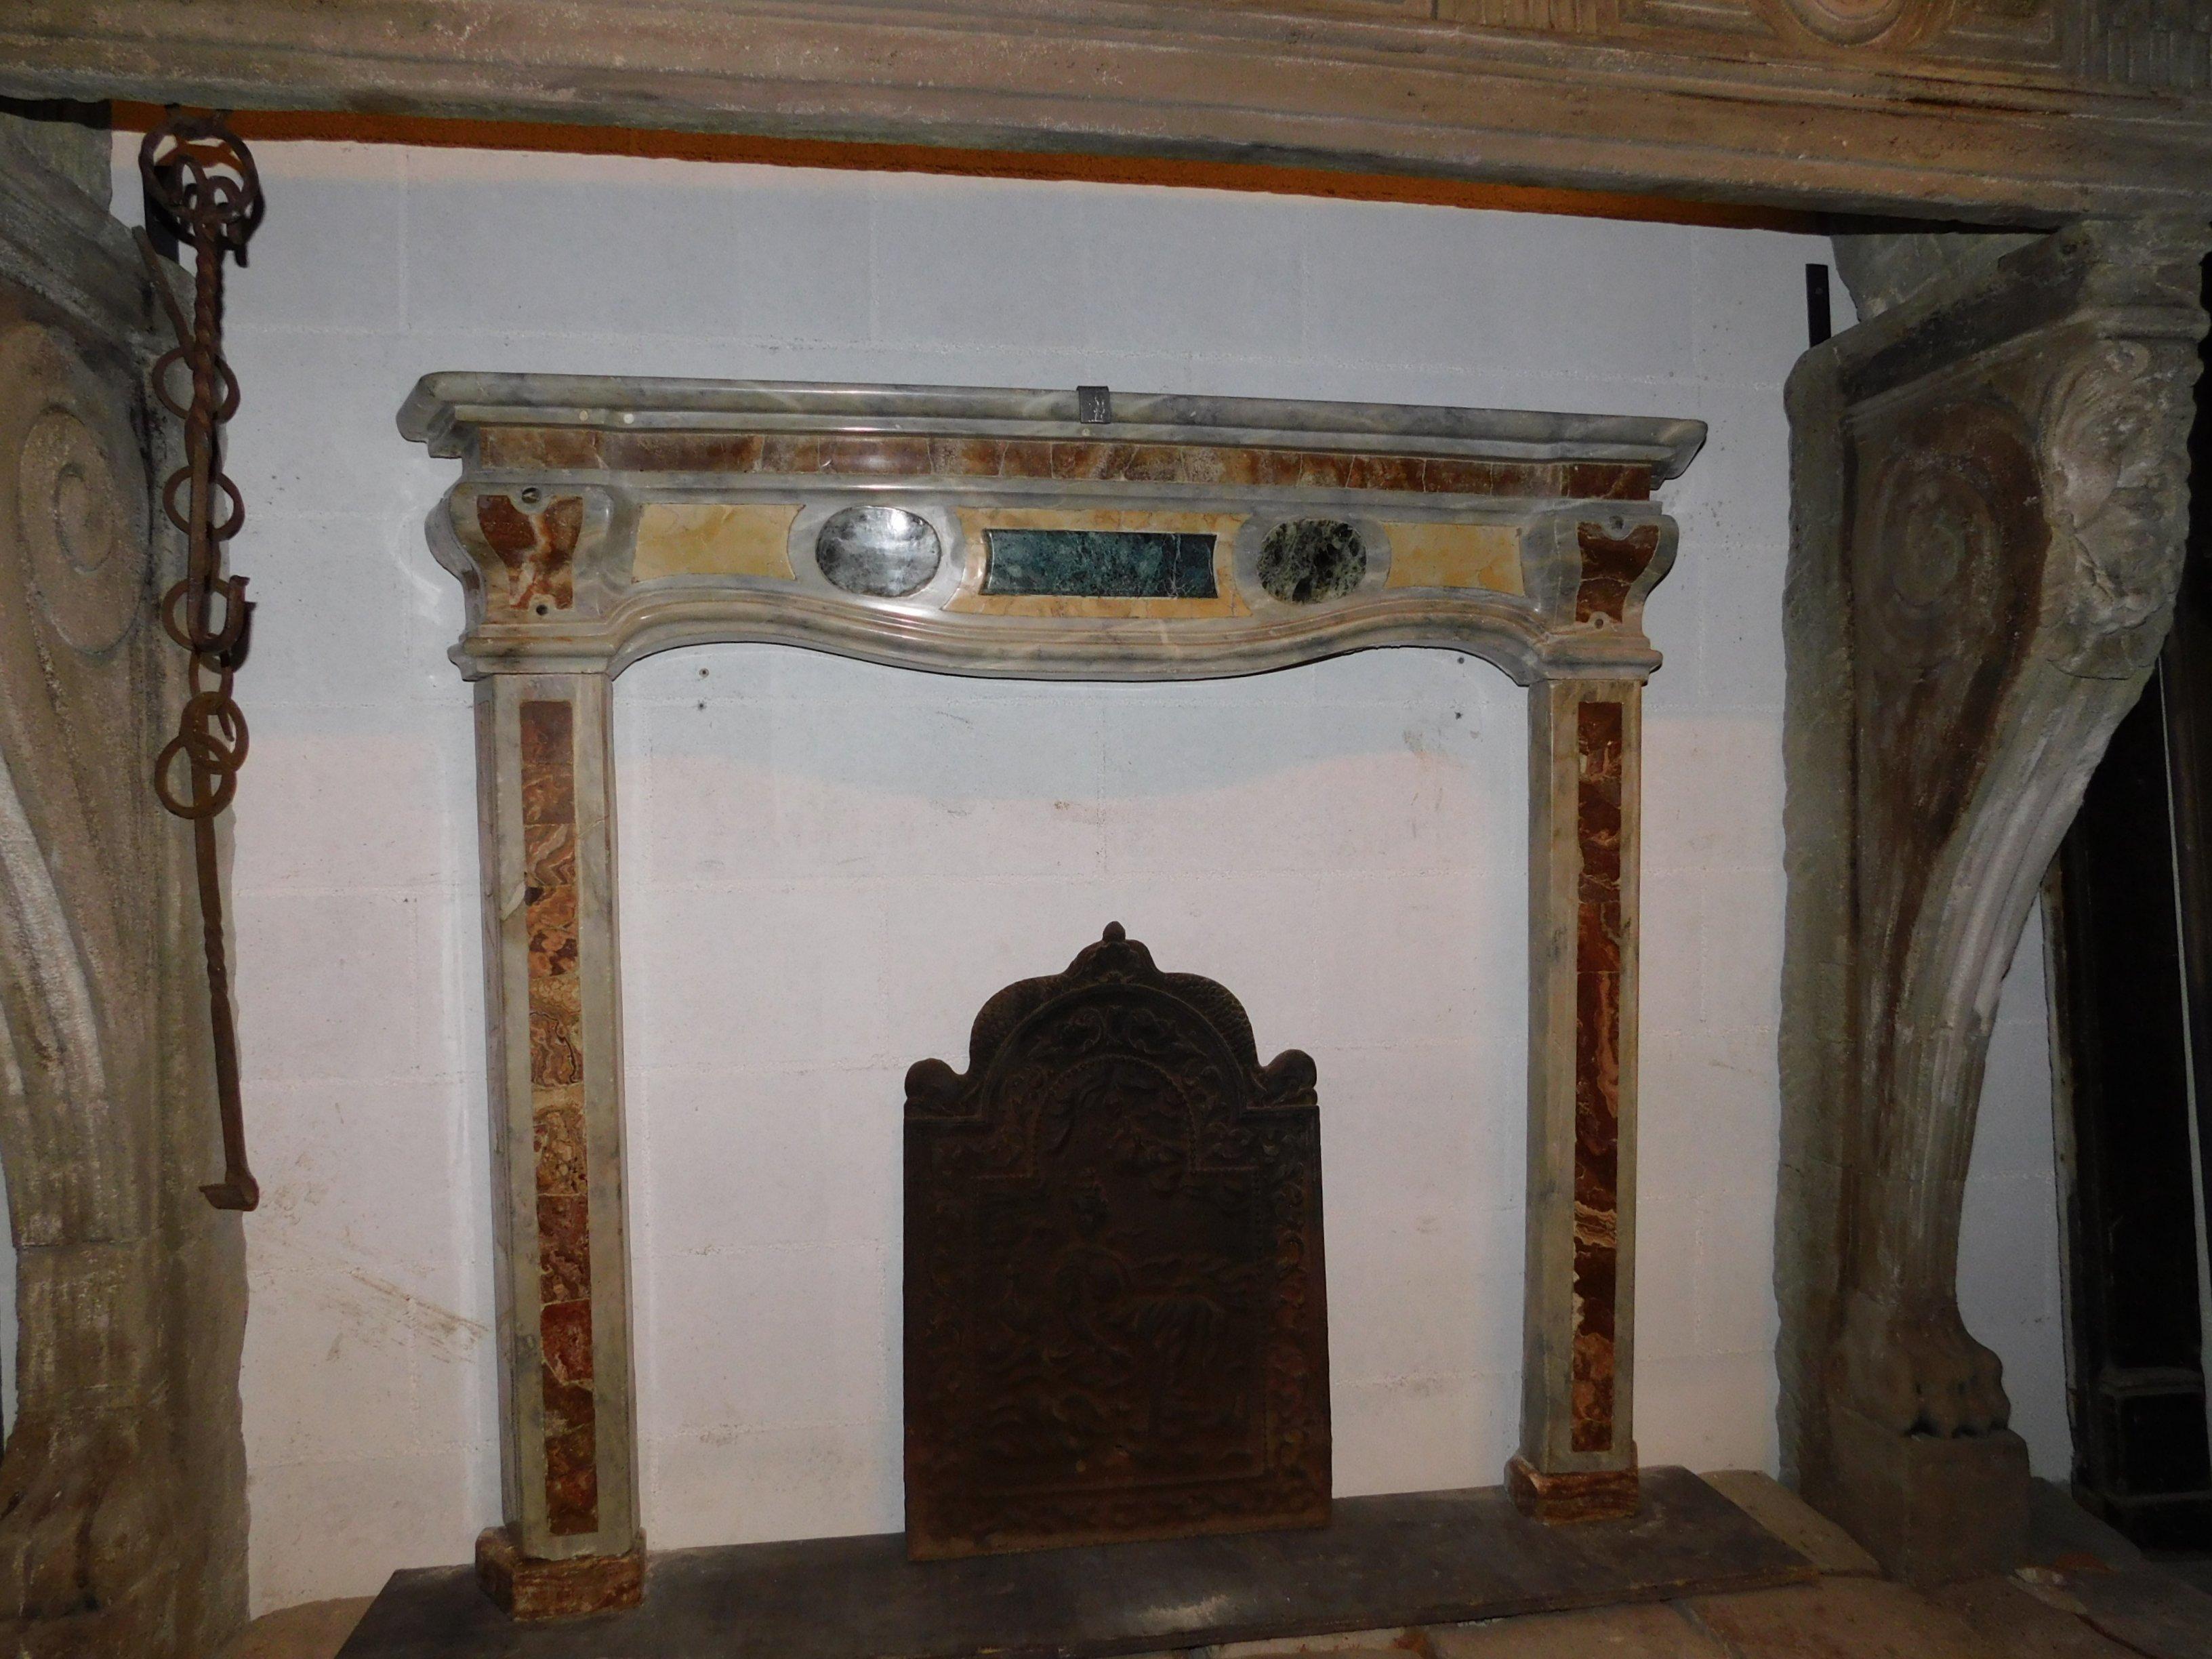 Antique Italian fireplace in Bardiglio gray marble, inlaid with various marbles, France red, Verona yellow and Alps green, first half of the eighteenth century, from northern of Italy, measure floor width. cm 145 x 20 prof. 123 H, 12 cm thick